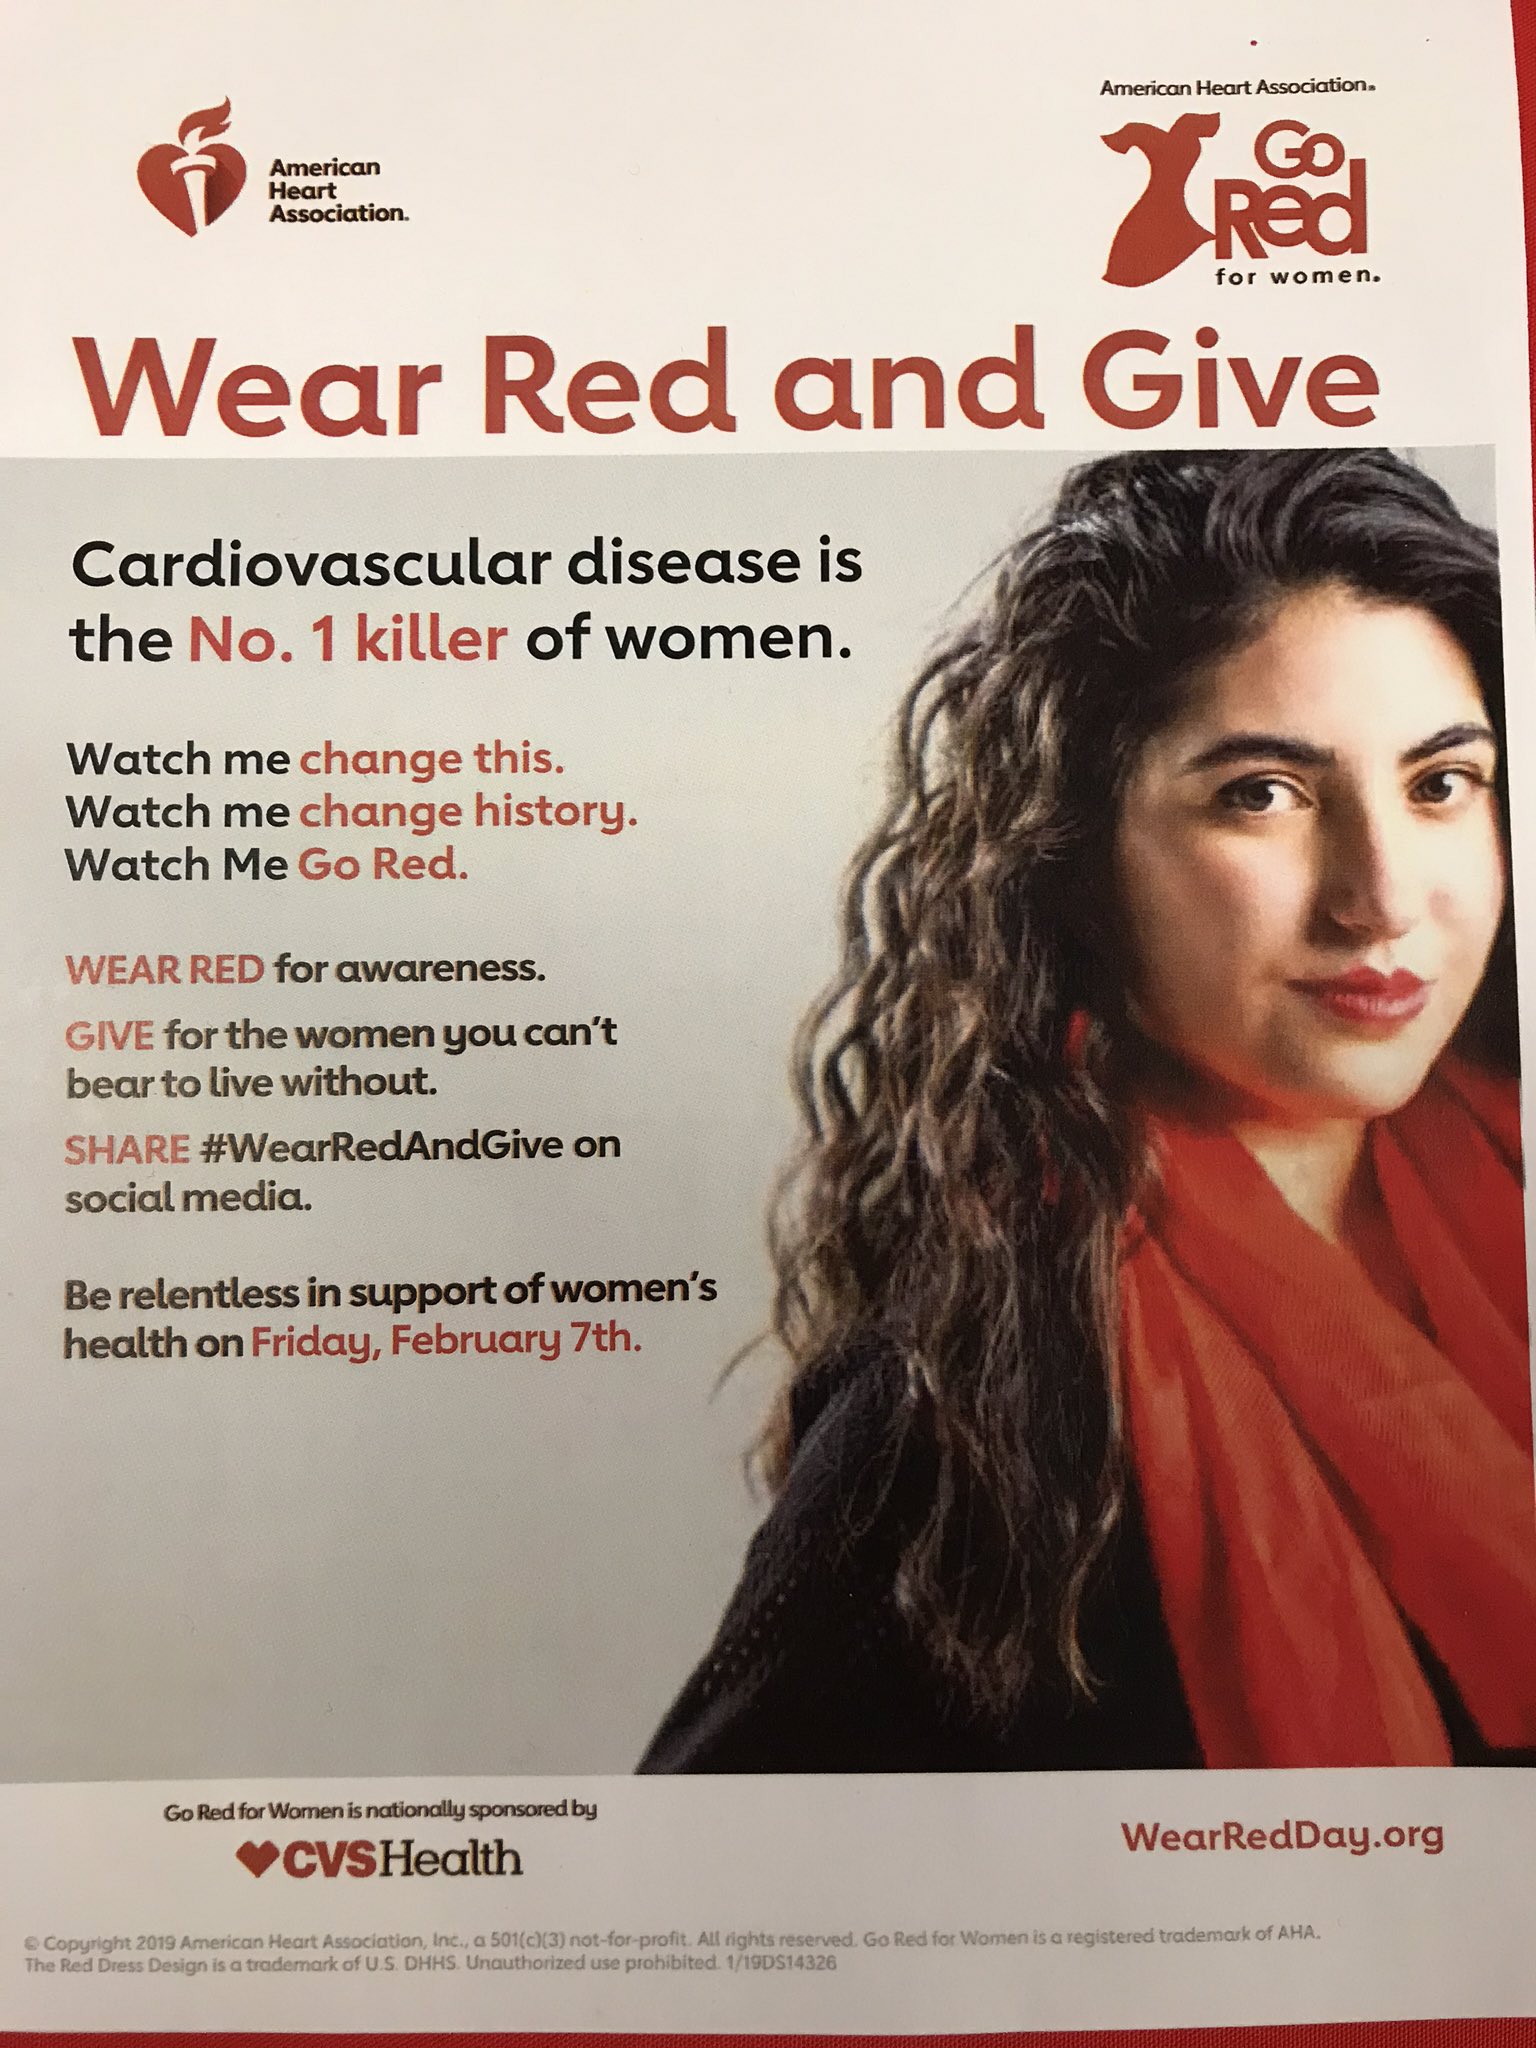 Go Red for Women Wear Red and Give